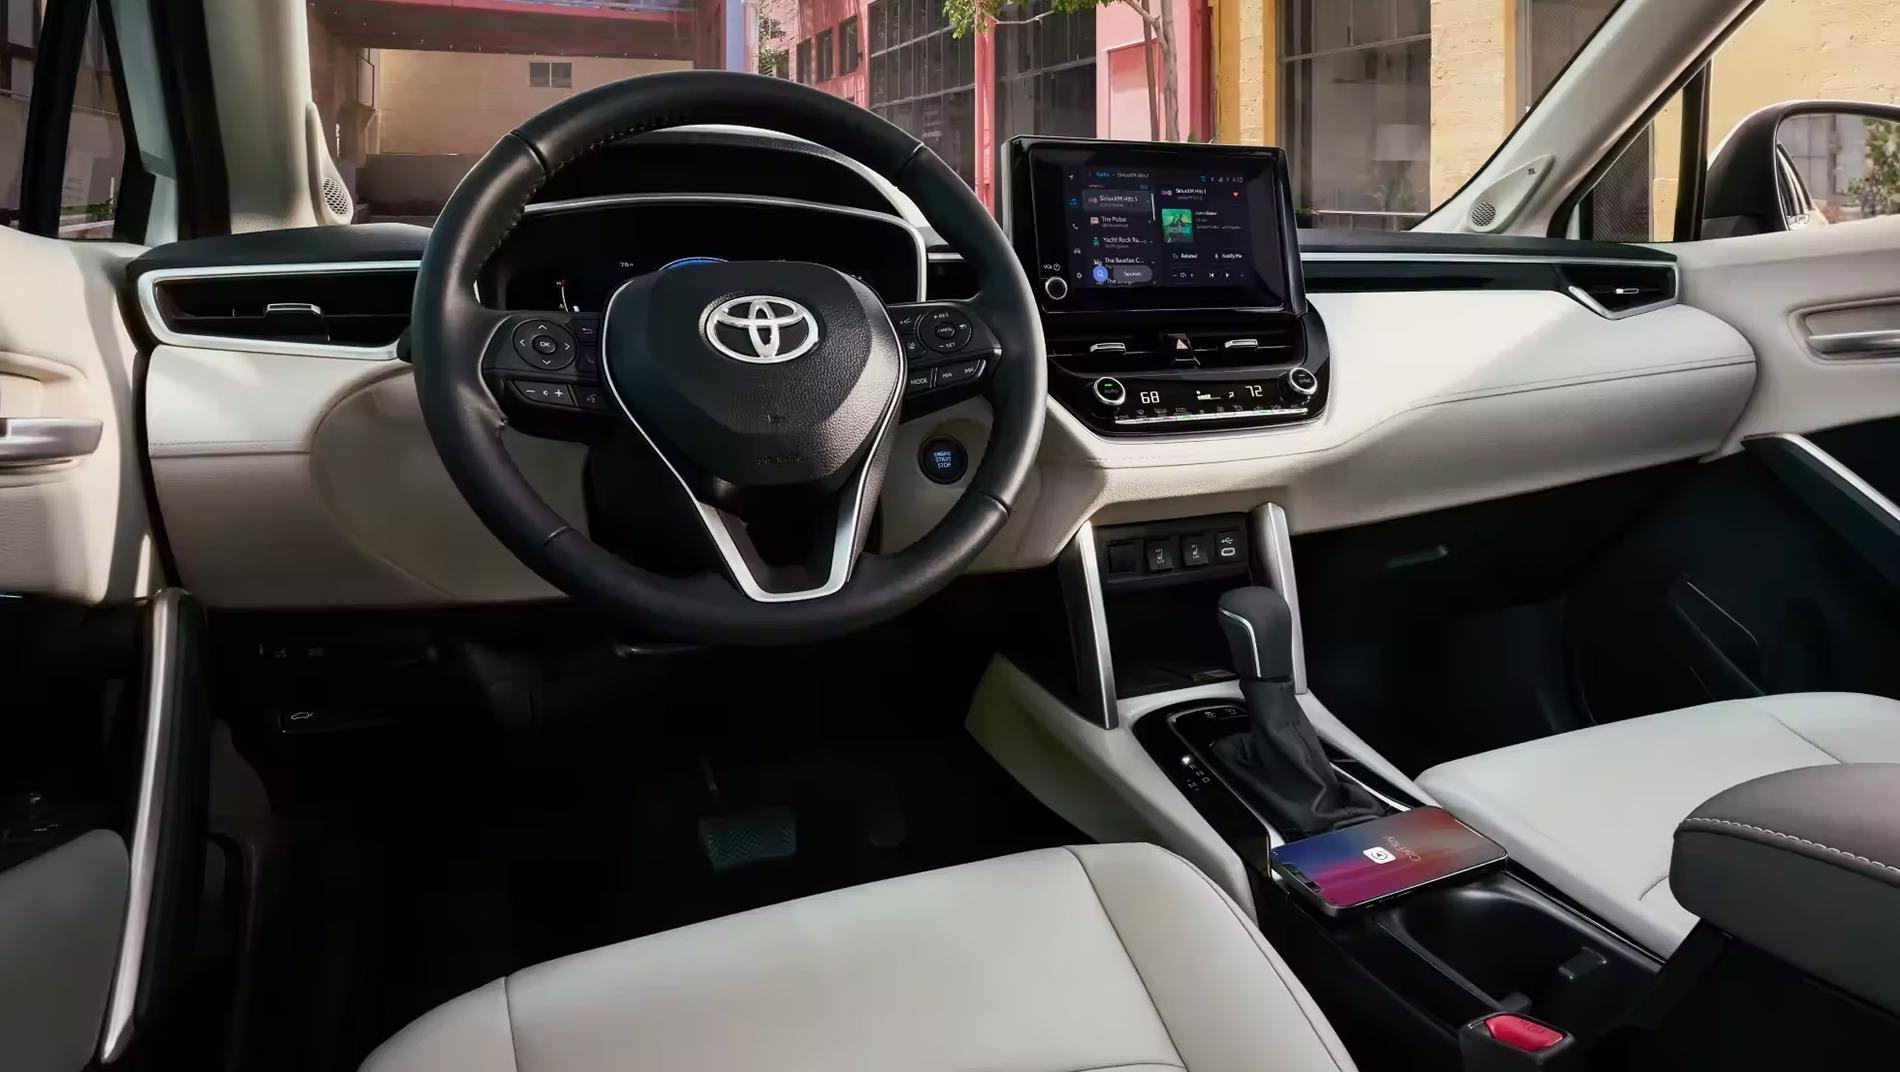 2023 Toyota Corolla Cross interior featuring touchscreen and wireless charging